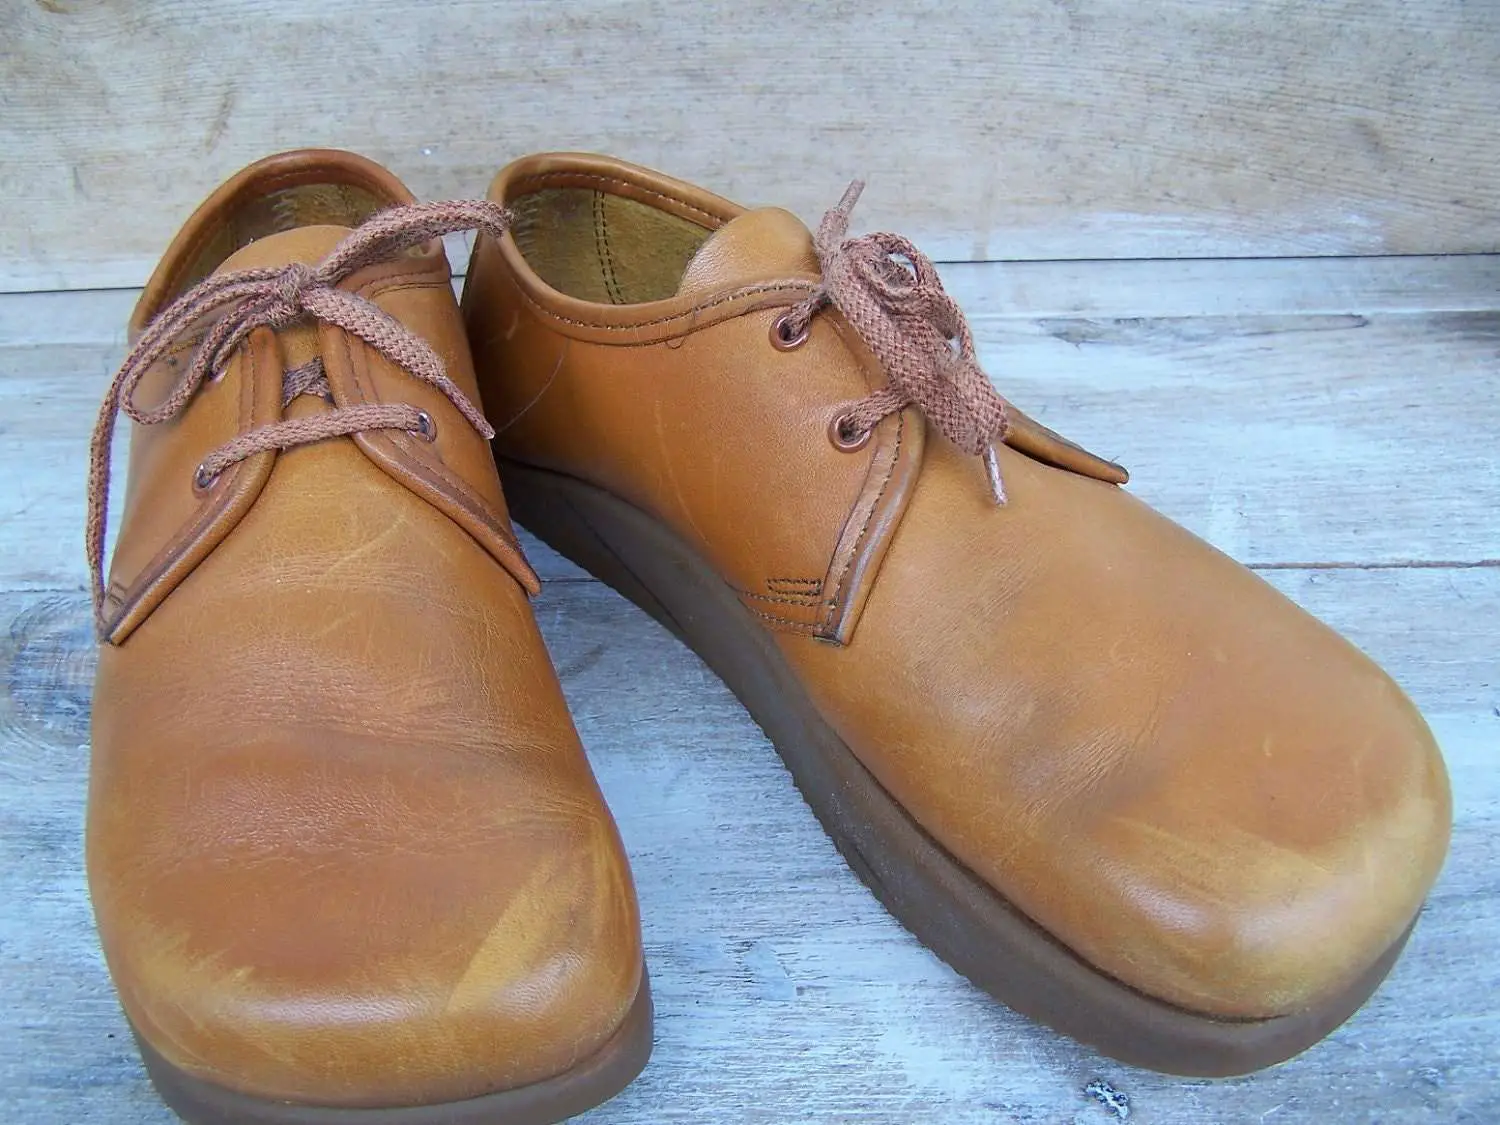 Vintage Kalso 1970s Earth Shoes size 6